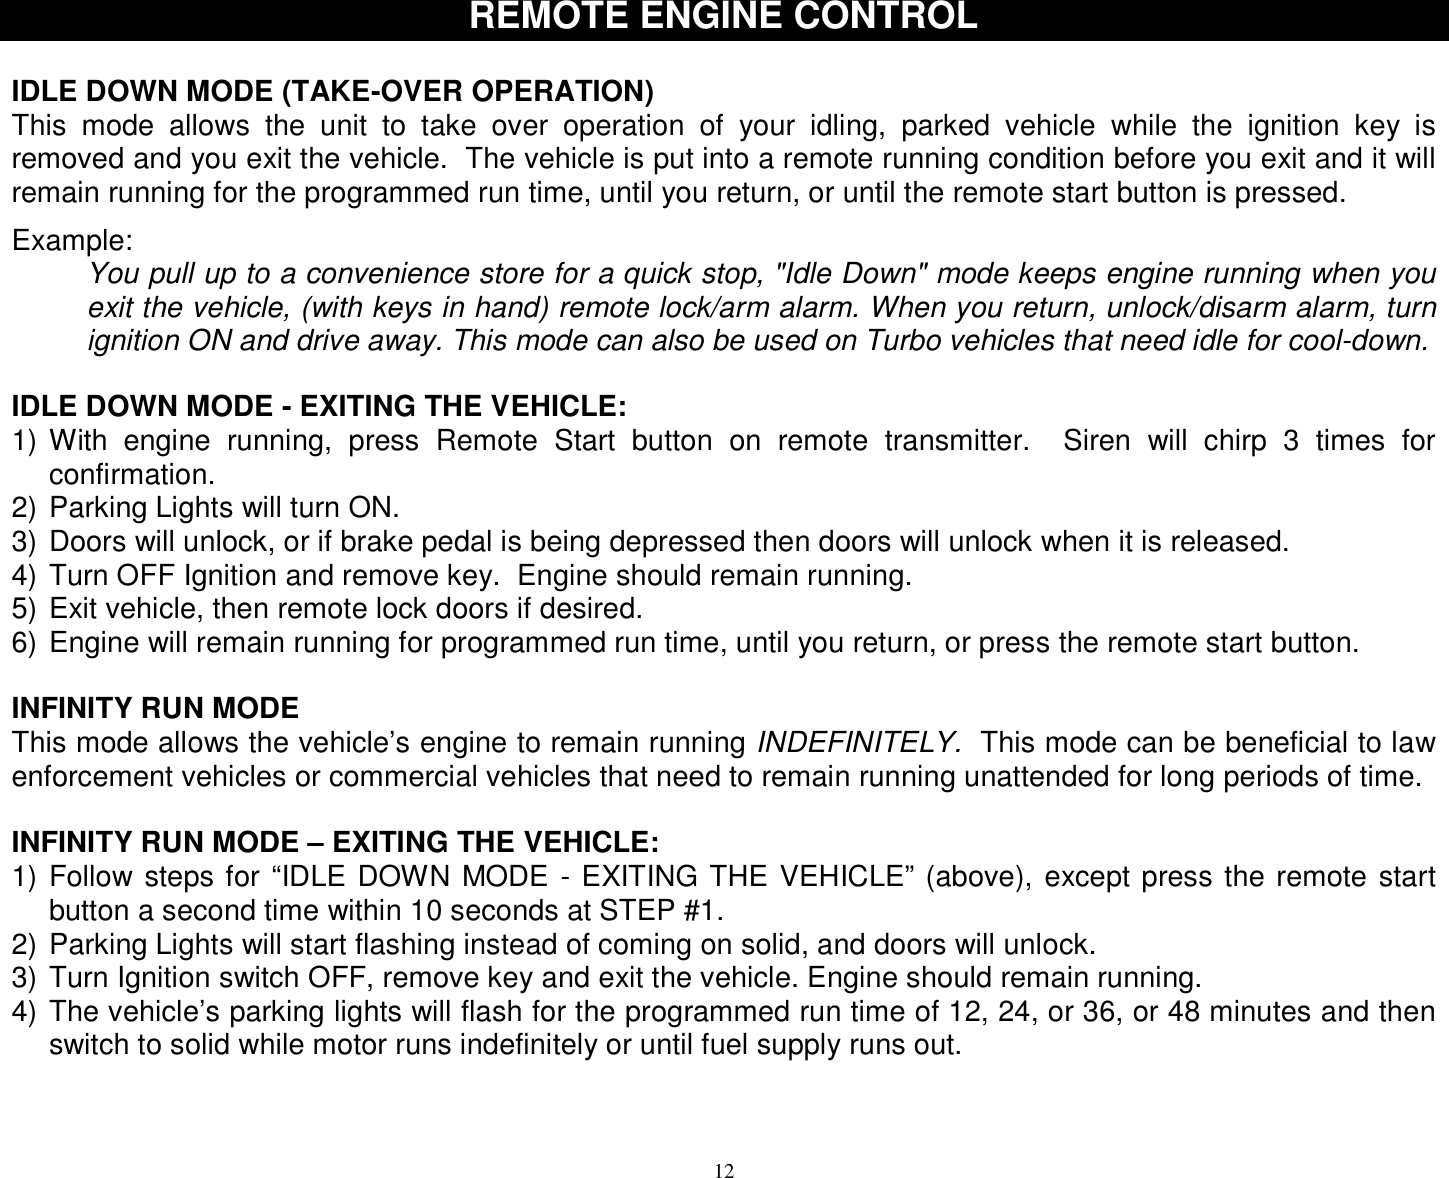  12 REMOTE ENGINE CONTROL  IDLE DOWN MODE (TAKE-OVER OPERATION) This mode allows the unit to take over operation of your idling, parked vehicle while the ignition key is removed and you exit the vehicle.  The vehicle is put into a remote running condition before you exit and it will remain running for the programmed run time, until you return, or until the remote start button is pressed.   Example: You pull up to a convenience store for a quick stop, &quot;Idle Down&quot; mode keeps engine running when you exit the vehicle, (with keys in hand) remote lock/arm alarm. When you return, unlock/disarm alarm, turn ignition ON and drive away. This mode can also be used on Turbo vehicles that need idle for cool-down.  IDLE DOWN MODE - EXITING THE VEHICLE: 1) With engine running, press Remote Start button on remote transmitter.  Siren will chirp 3 times for confirmation. 2) Parking Lights will turn ON. 3) Doors will unlock, or if brake pedal is being depressed then doors will unlock when it is released. 4) Turn OFF Ignition and remove key.  Engine should remain running. 5) Exit vehicle, then remote lock doors if desired. 6) Engine will remain running for programmed run time, until you return, or press the remote start button.  INFINITY RUN MODE This mode allows the vehicle’s engine to remain running INDEFINITELY.  This mode can be beneficial to law enforcement vehicles or commercial vehicles that need to remain running unattended for long periods of time.  INFINITY RUN MODE – EXITING THE VEHICLE: 1) Follow steps for “IDLE DOWN MODE - EXITING THE VEHICLE” (above), except press the remote start button a second time within 10 seconds at STEP #1. 2) Parking Lights will start flashing instead of coming on solid, and doors will unlock. 3) Turn Ignition switch OFF, remove key and exit the vehicle. Engine should remain running. 4) The vehicle’s parking lights will flash for the programmed run time of 12, 24, or 36, or 48 minutes and then switch to solid while motor runs indefinitely or until fuel supply runs out.   